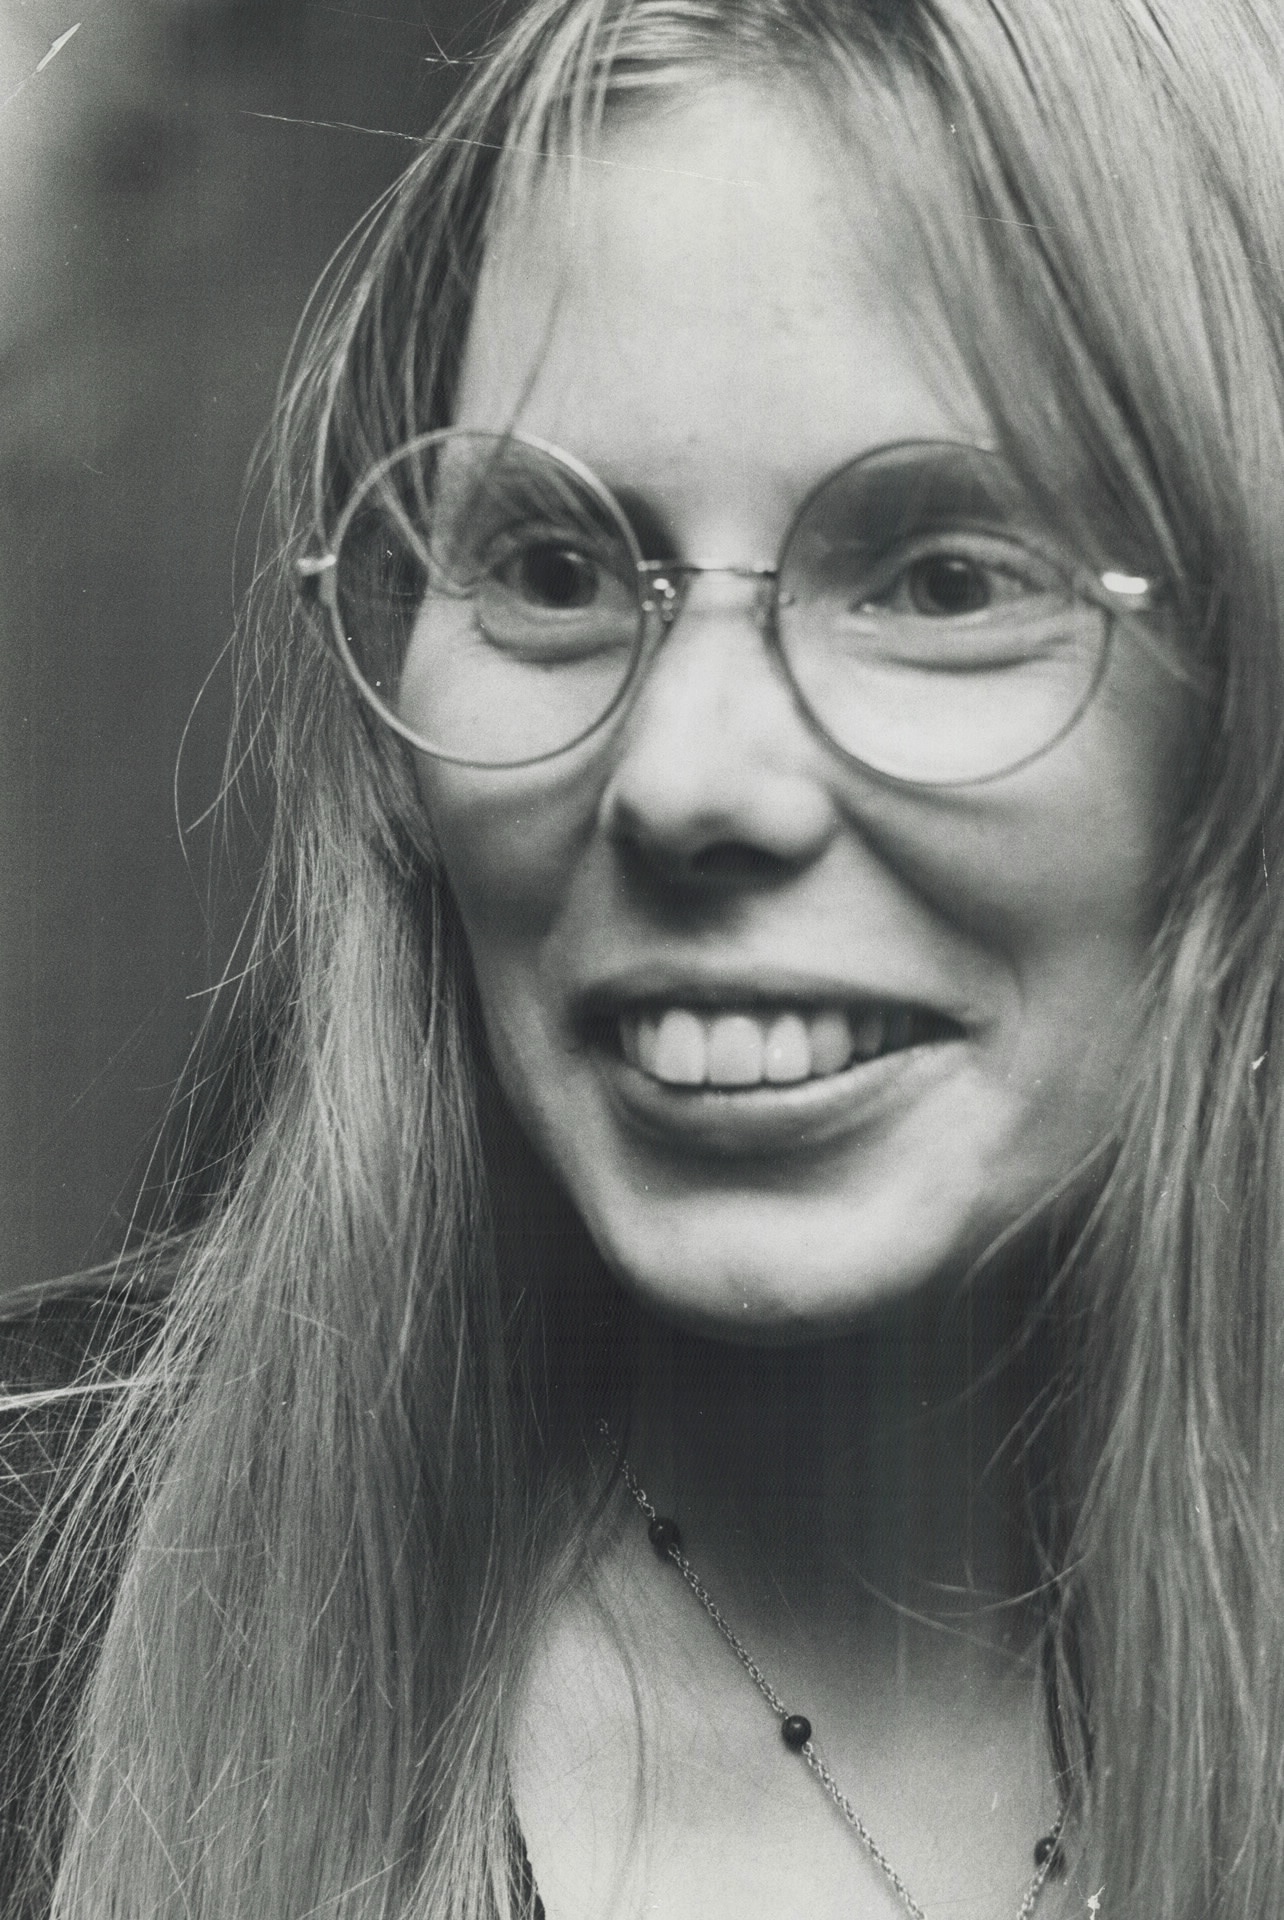 A black and white photo of a woman wearing glasses stares at the camera